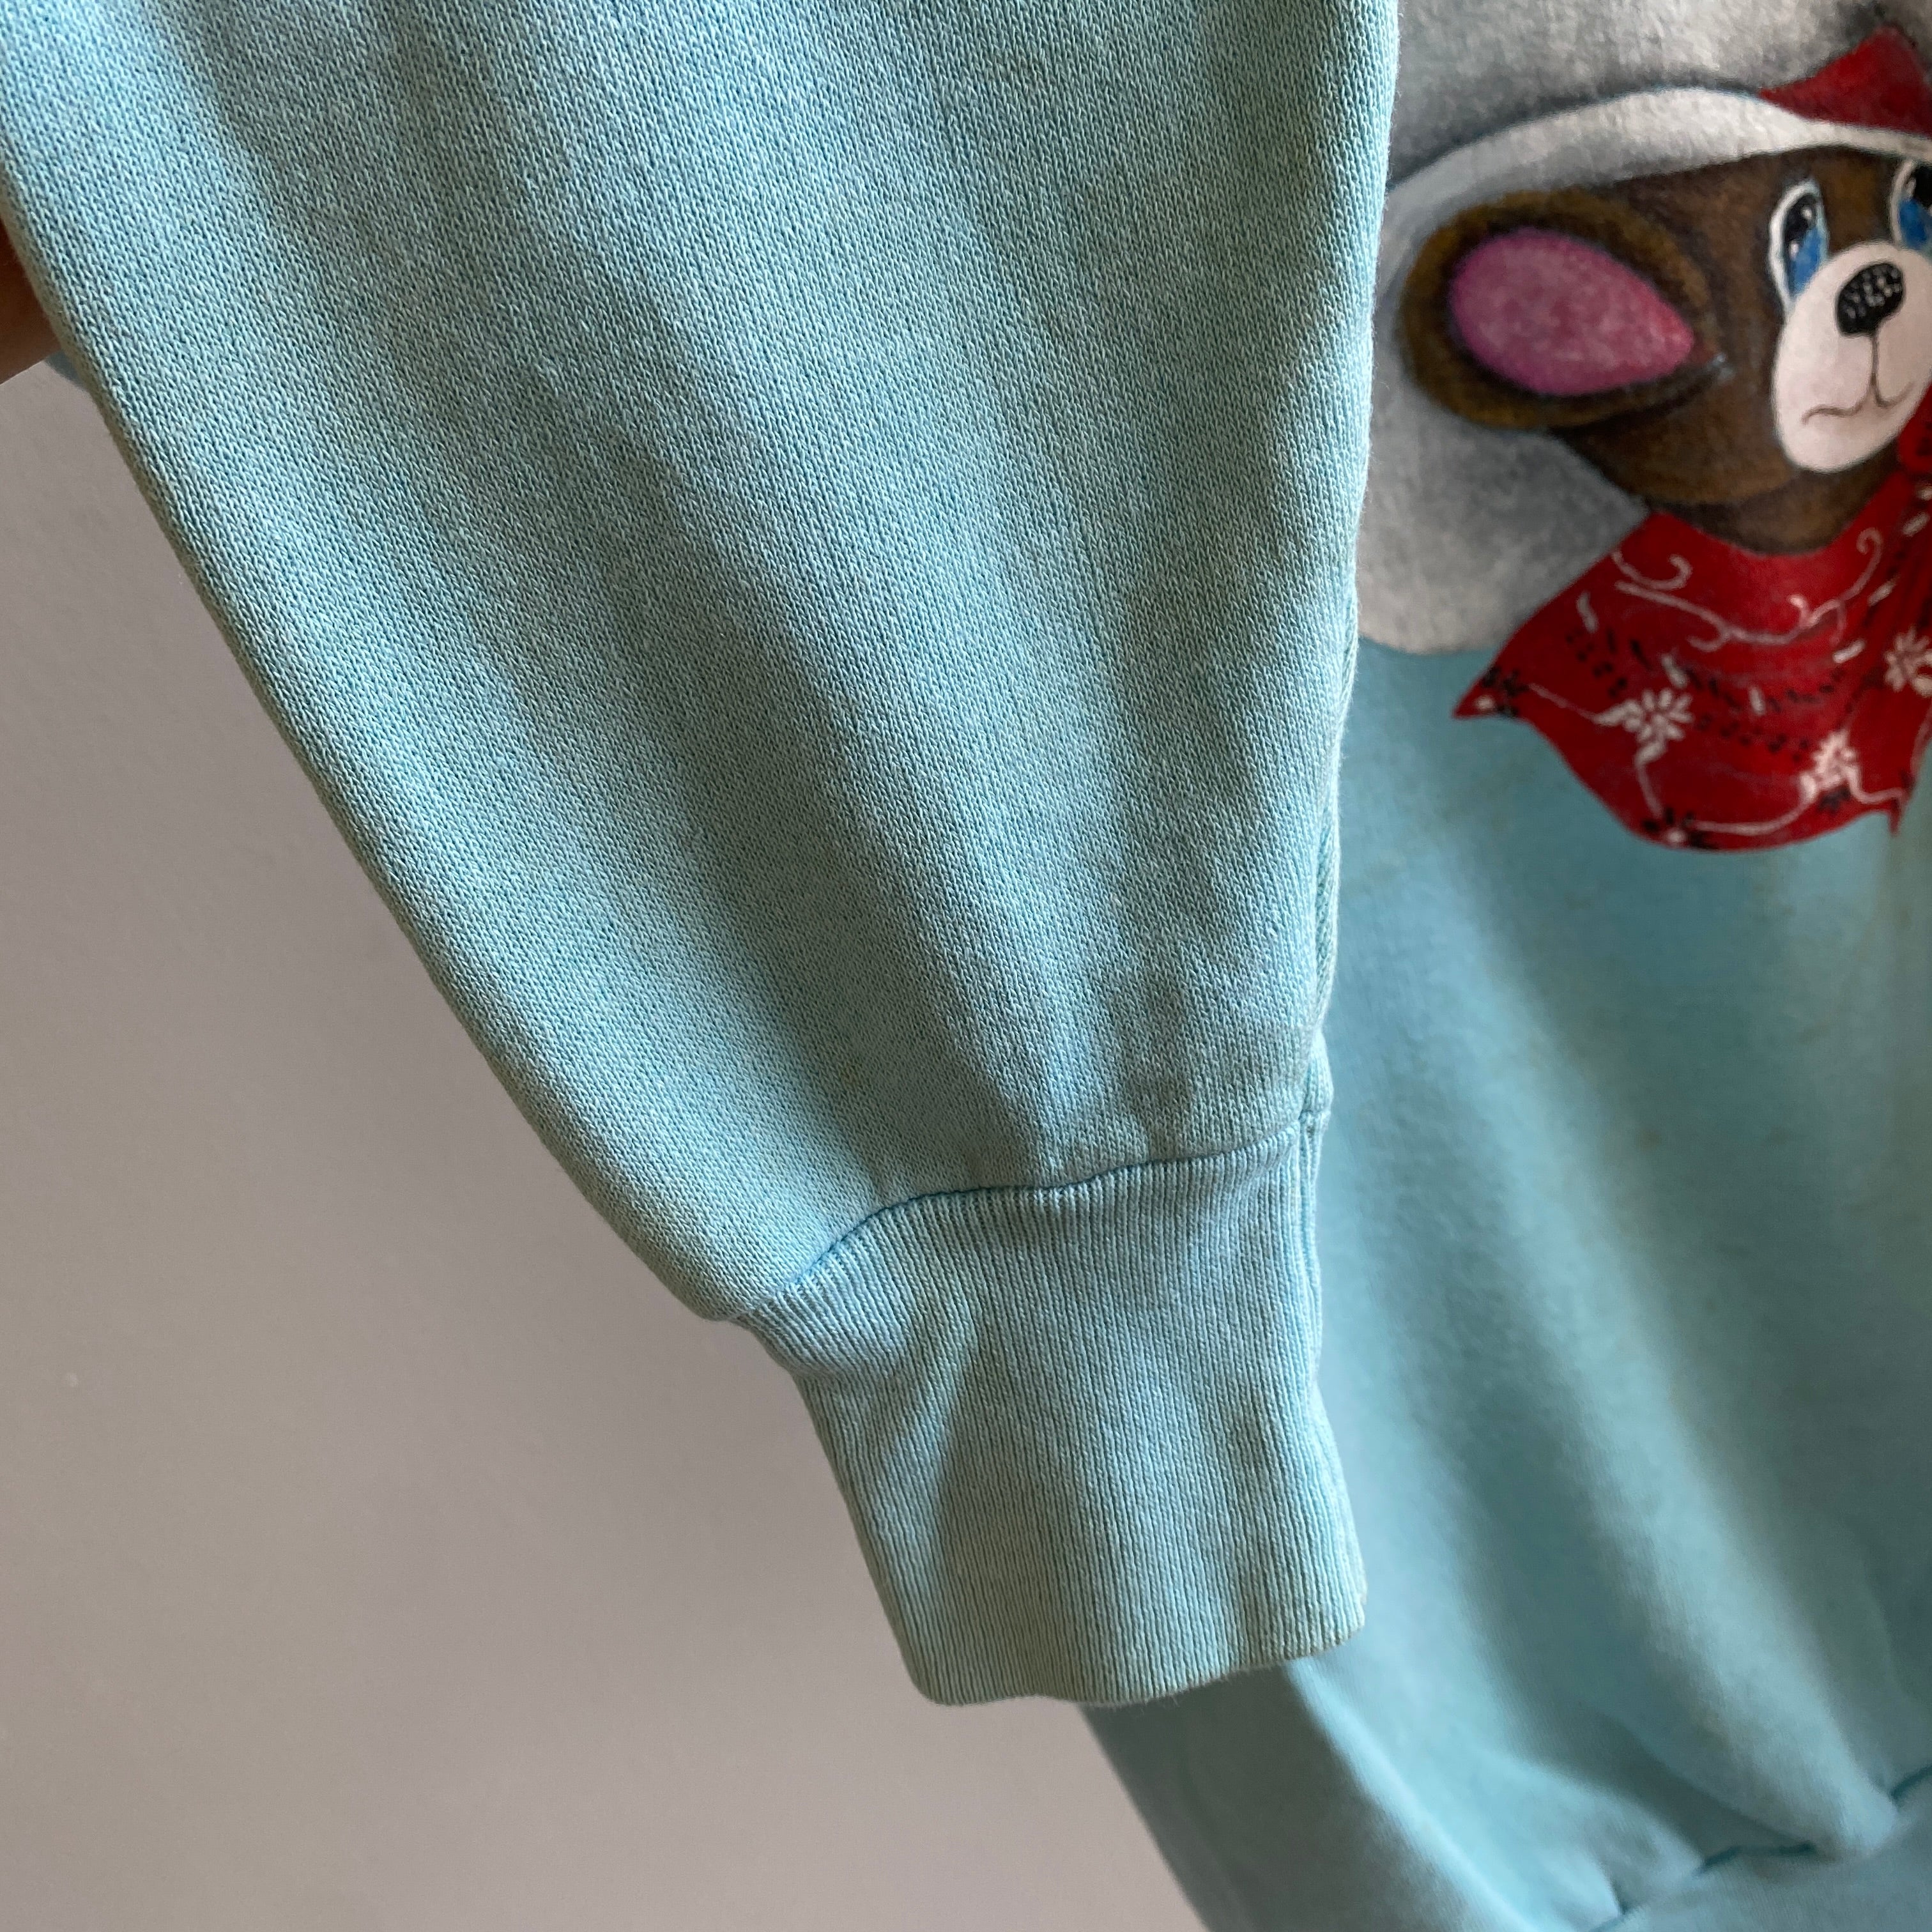 1991 Fievel Goes West Hand Painted DIY Super Stained Sweatshirt - OMG!!!